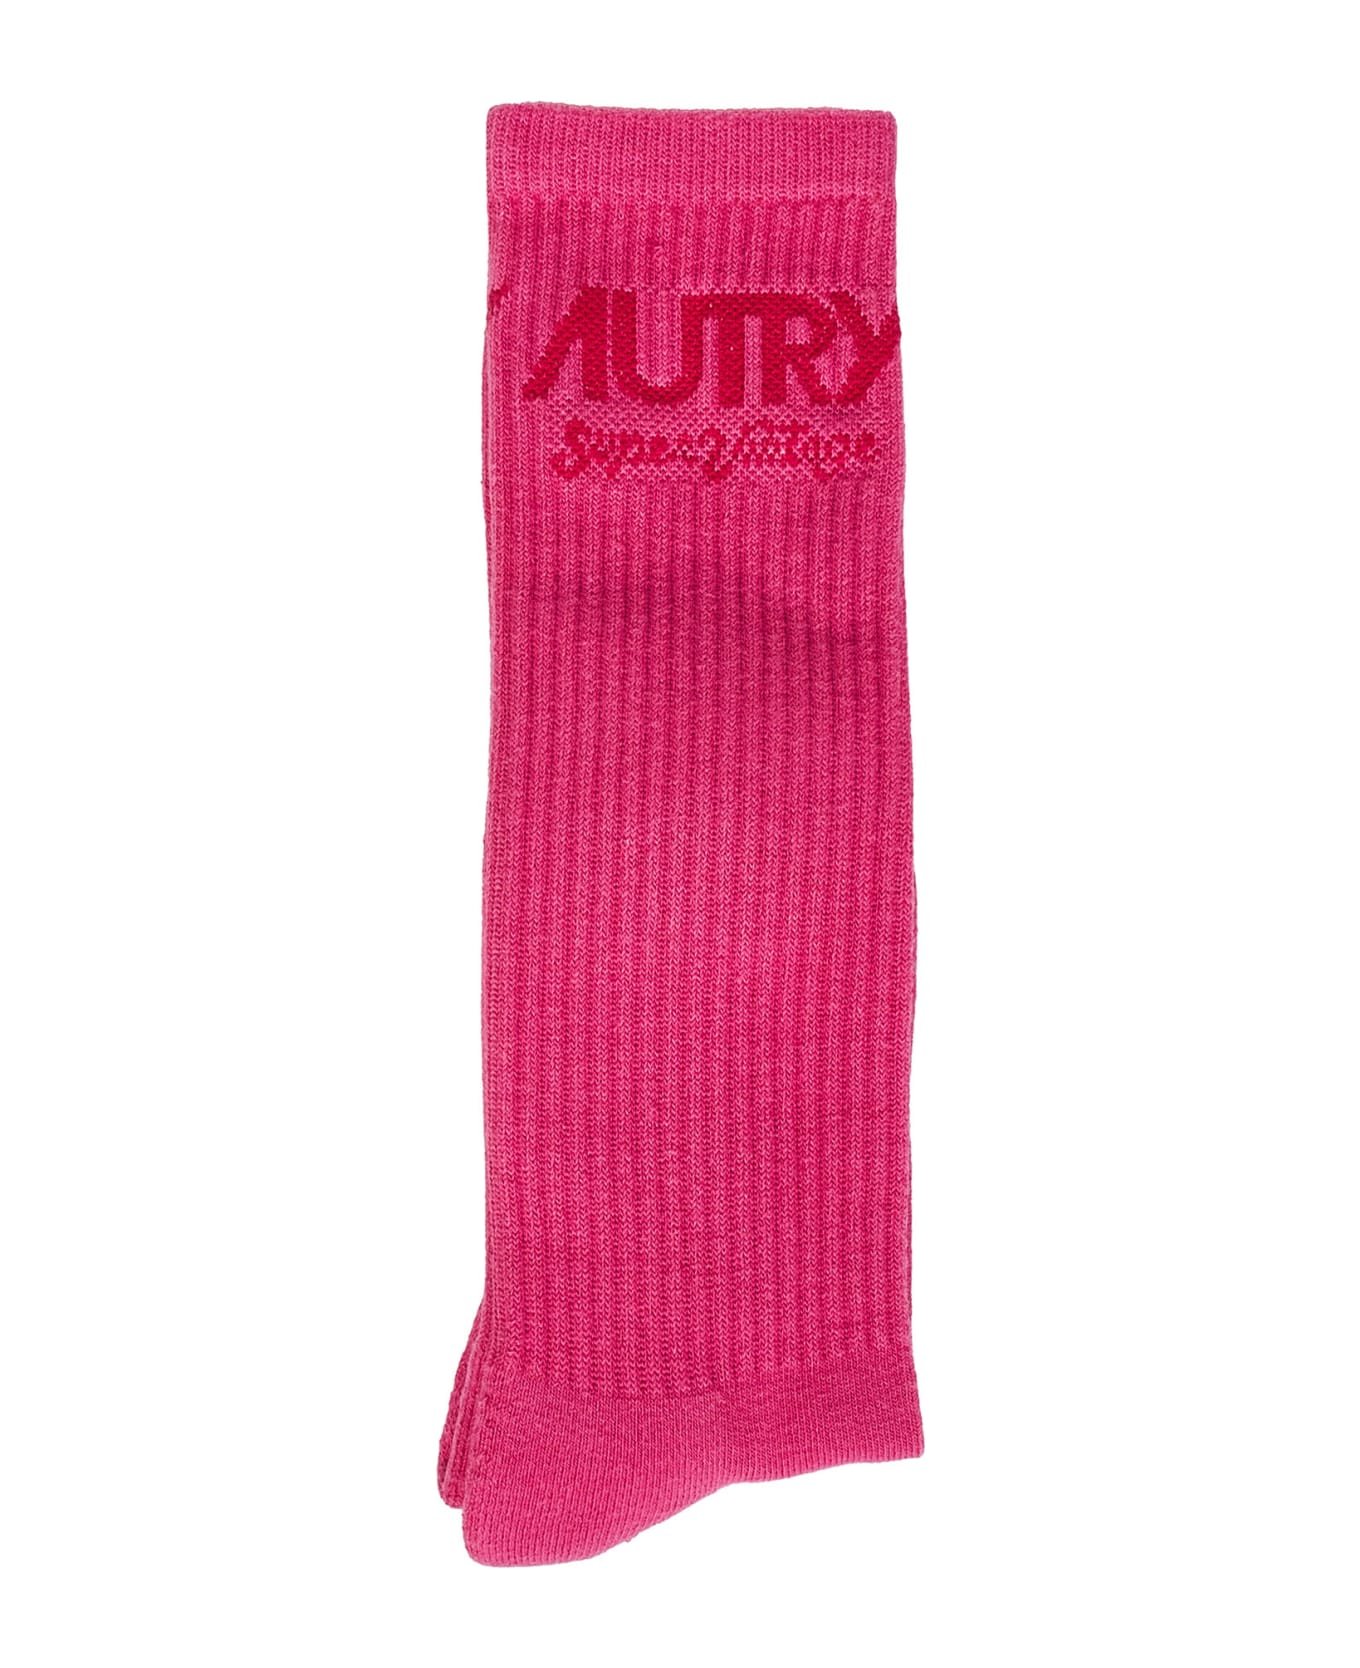 Autry Supervintage Socks - Fuxia 靴下